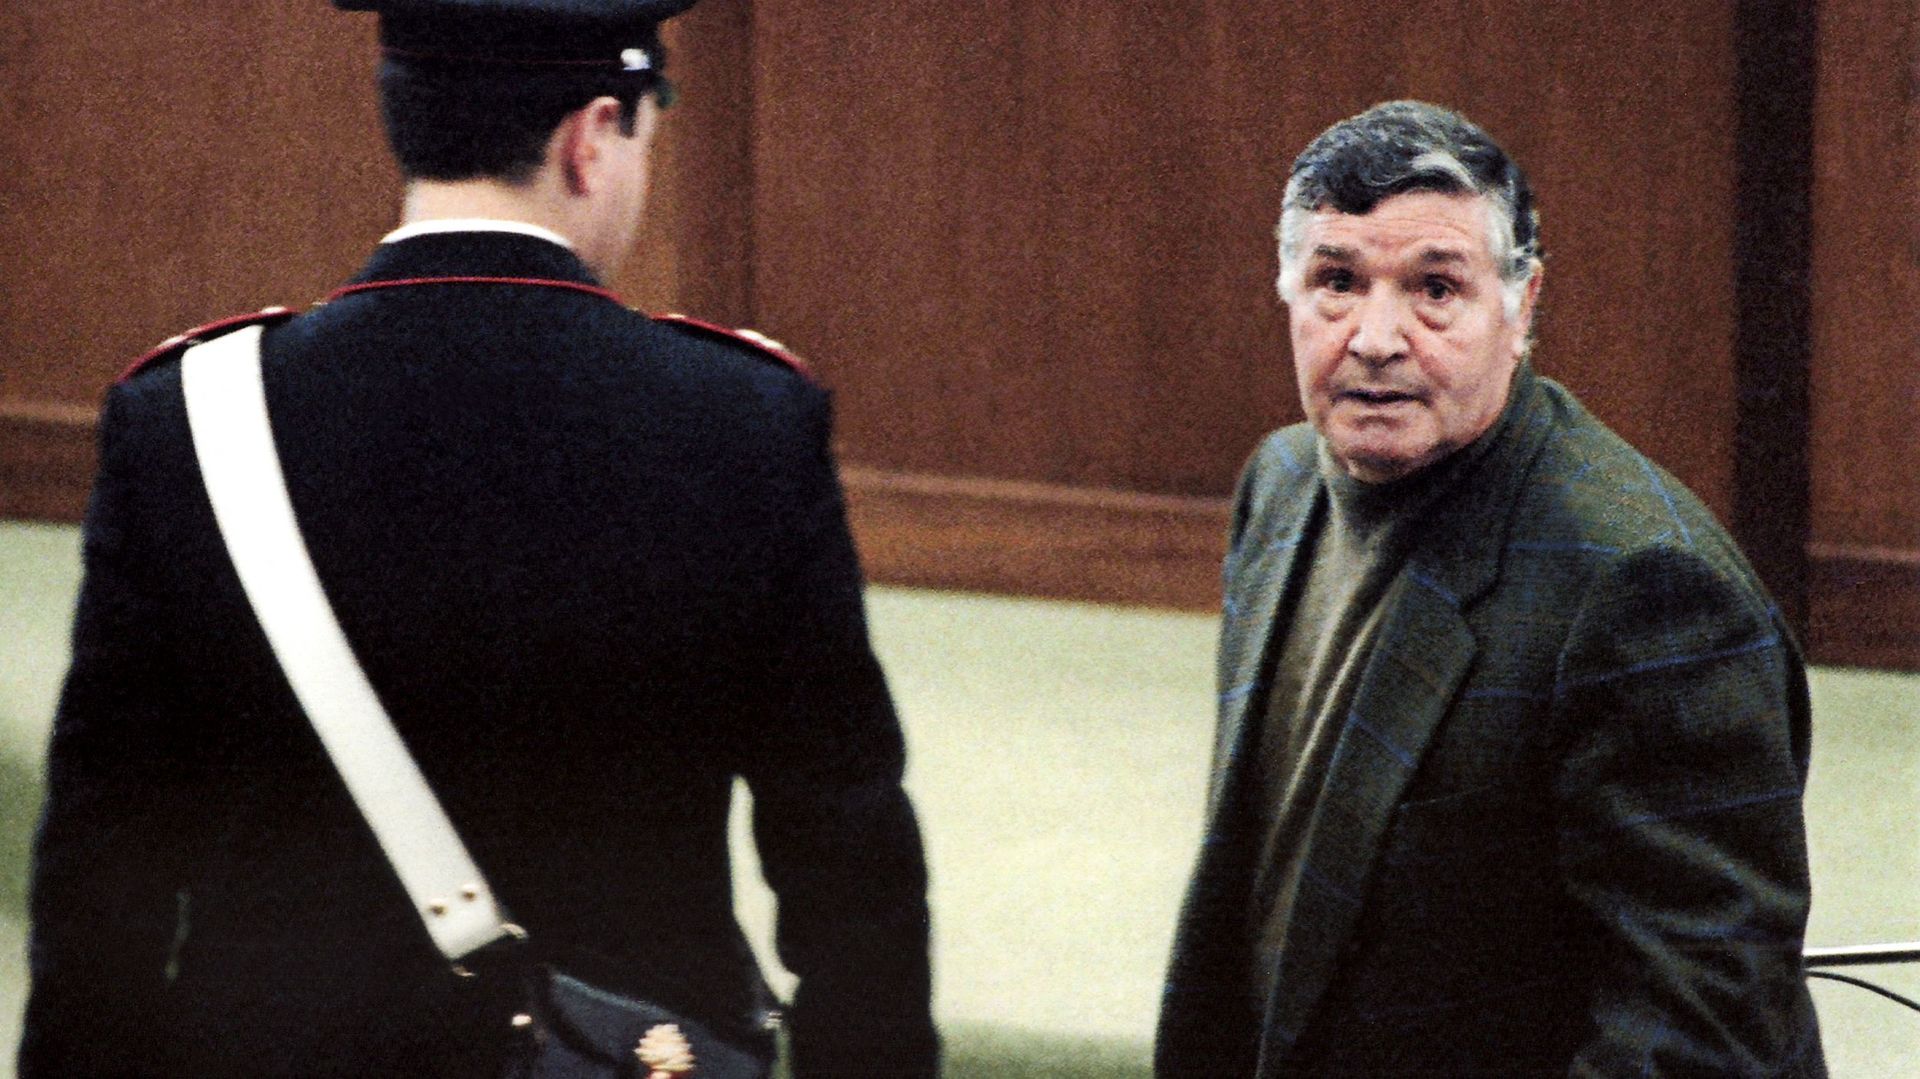 A picture taken on March 8, 1993 shows mafia boss Salvatore Toto Riina during his trial at the high security prison Ucciardone in Palermo.